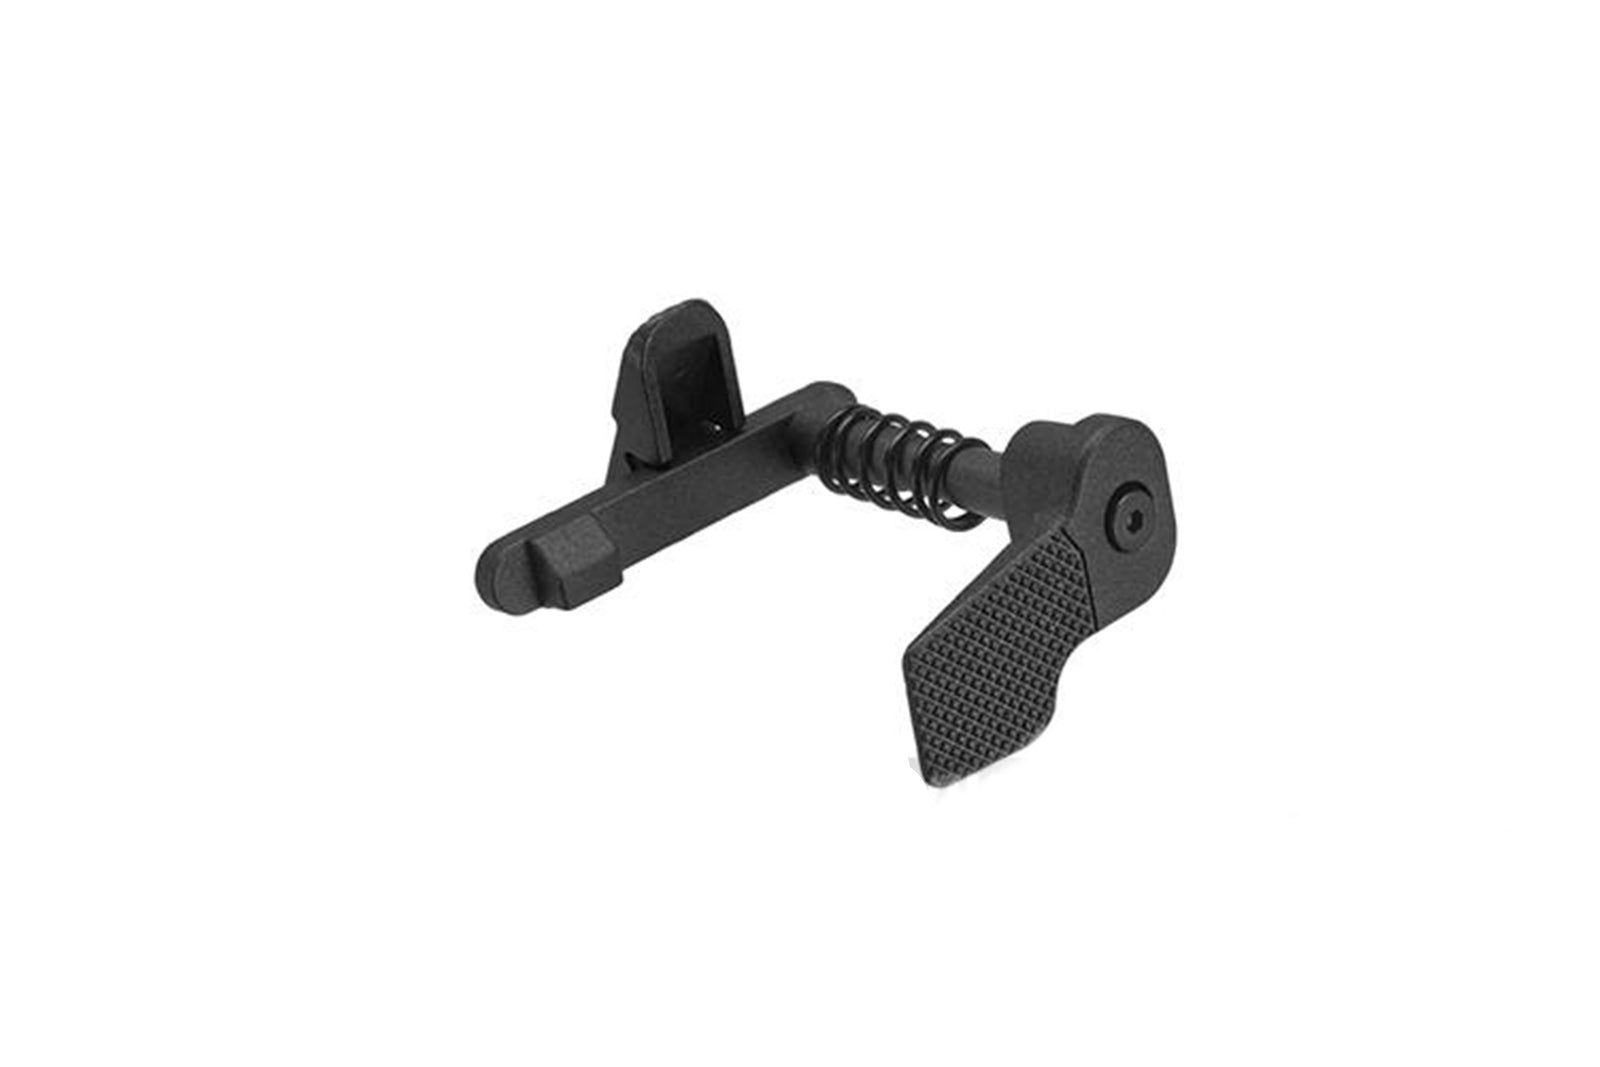 APS Ambidextrous Magazine Release for M4/M16 Series Airsoft AEGs (Color: Black)